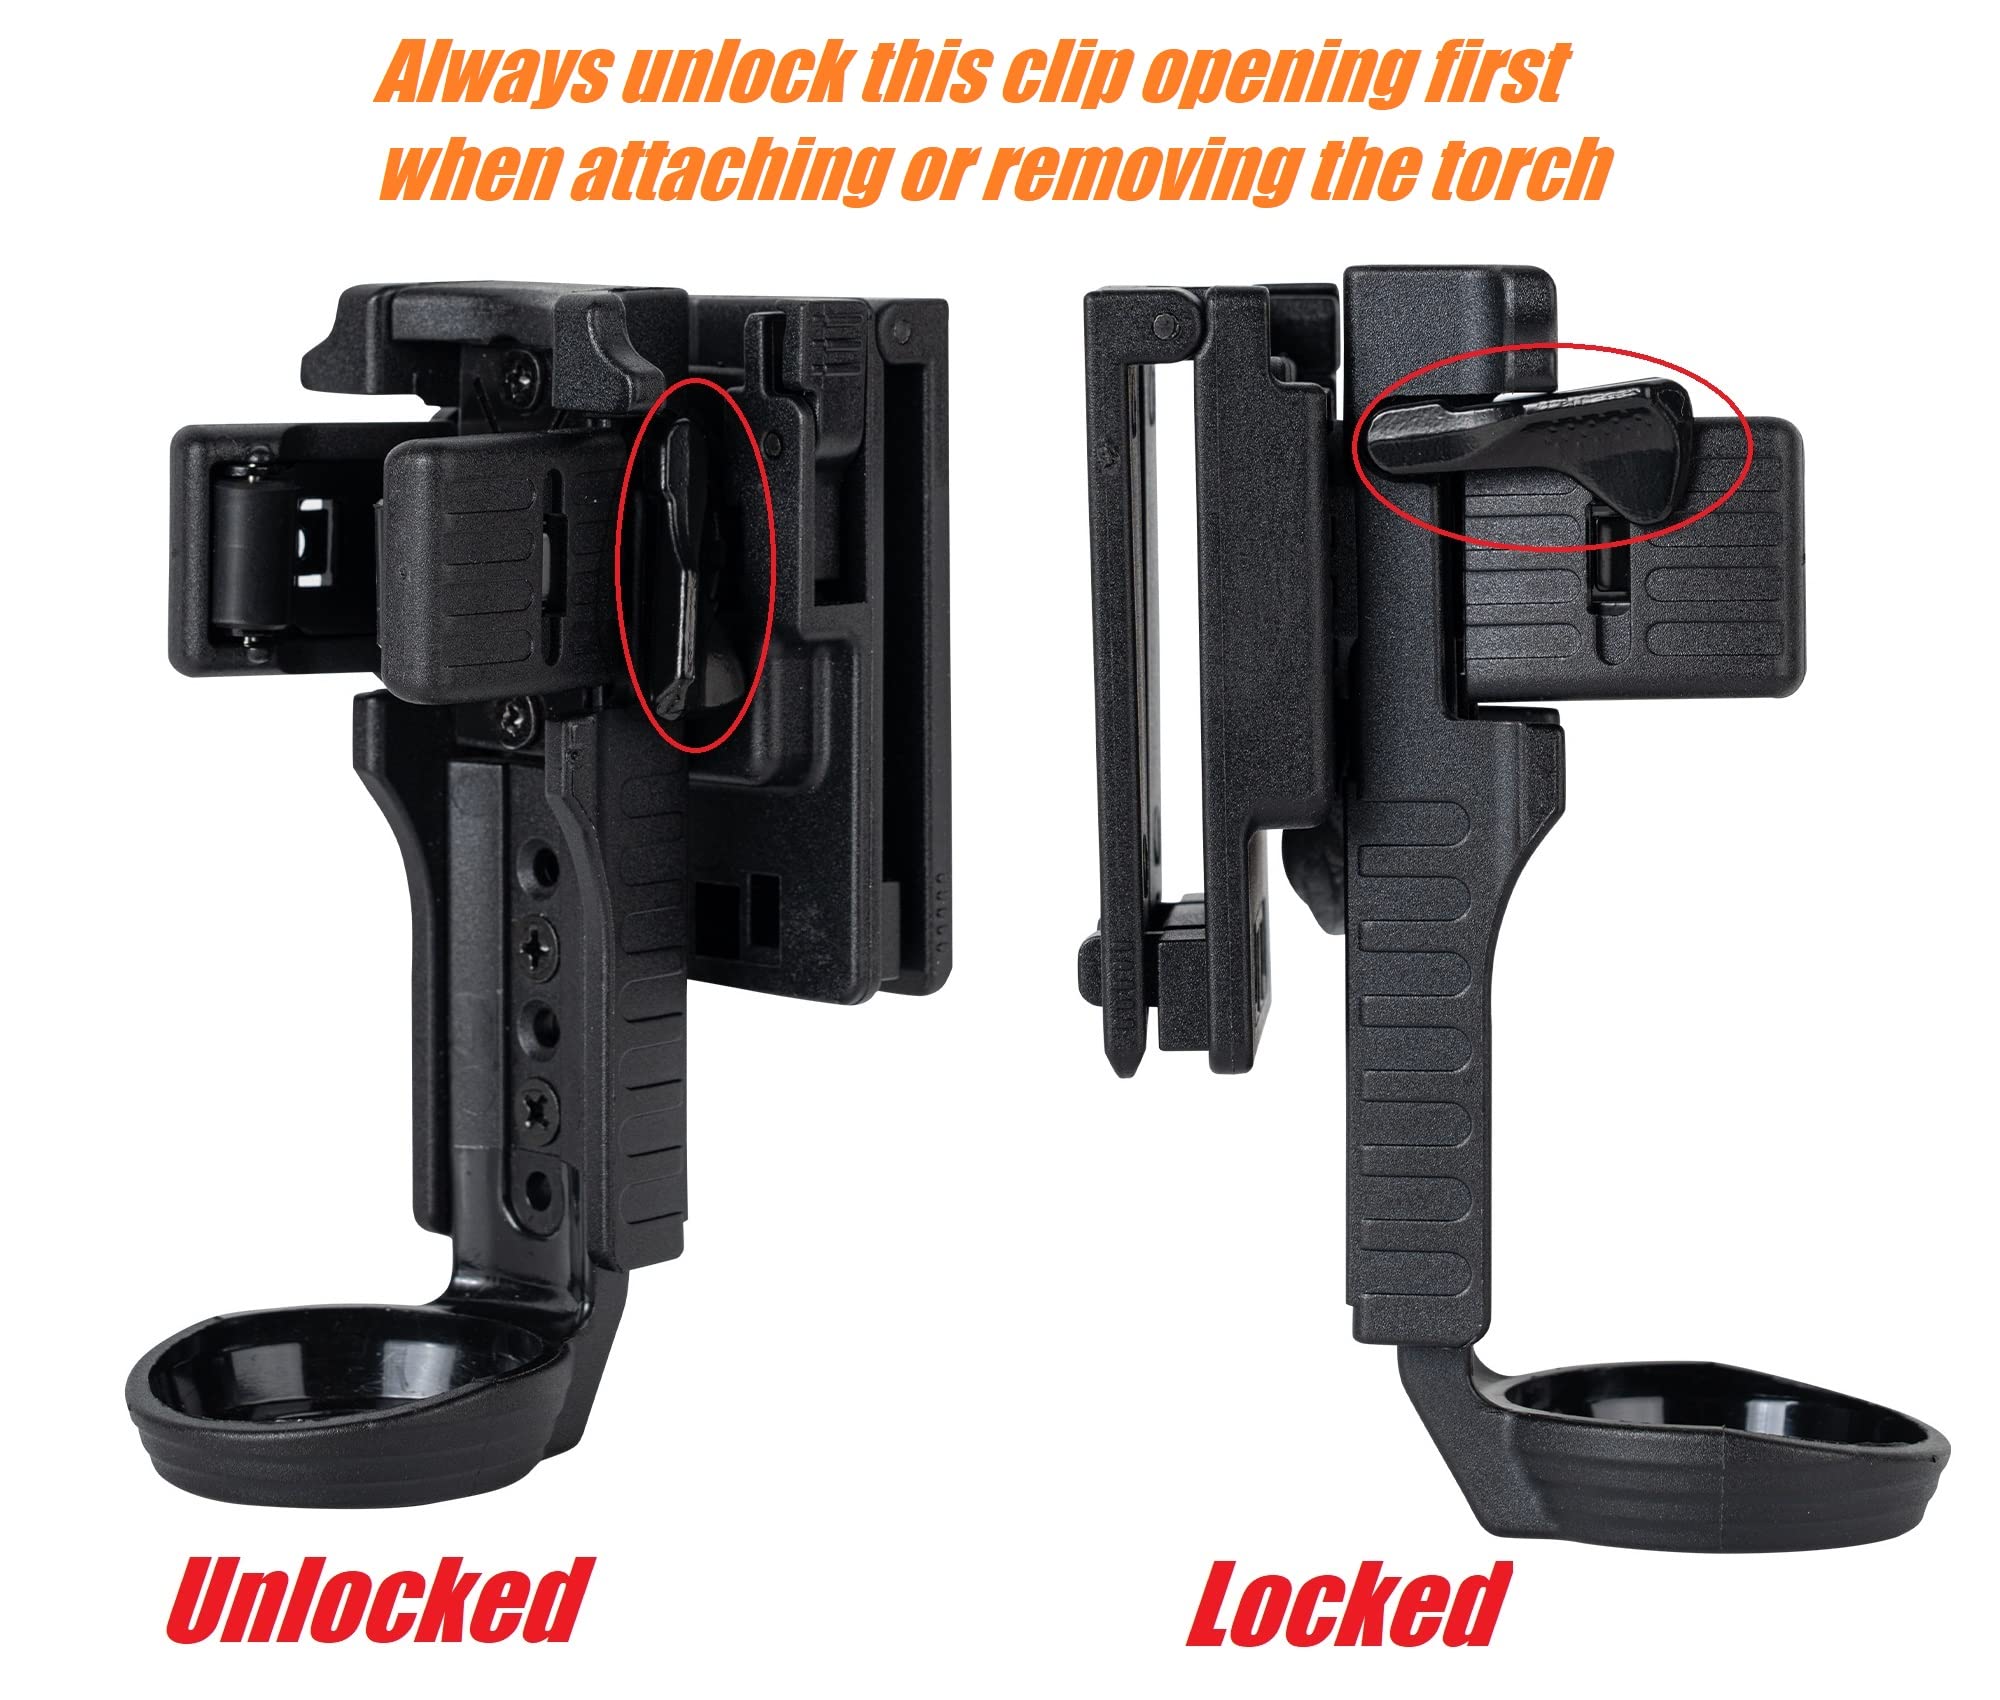 TACNEX Quick Release Flashlight Holder w/Duty Belt Clip Tactical Torch Holster Carrier Rotatable Light Carry Case Stand fit 1"-1.25" Diameter Flashlight for Police Leo Security Military Work Patrol